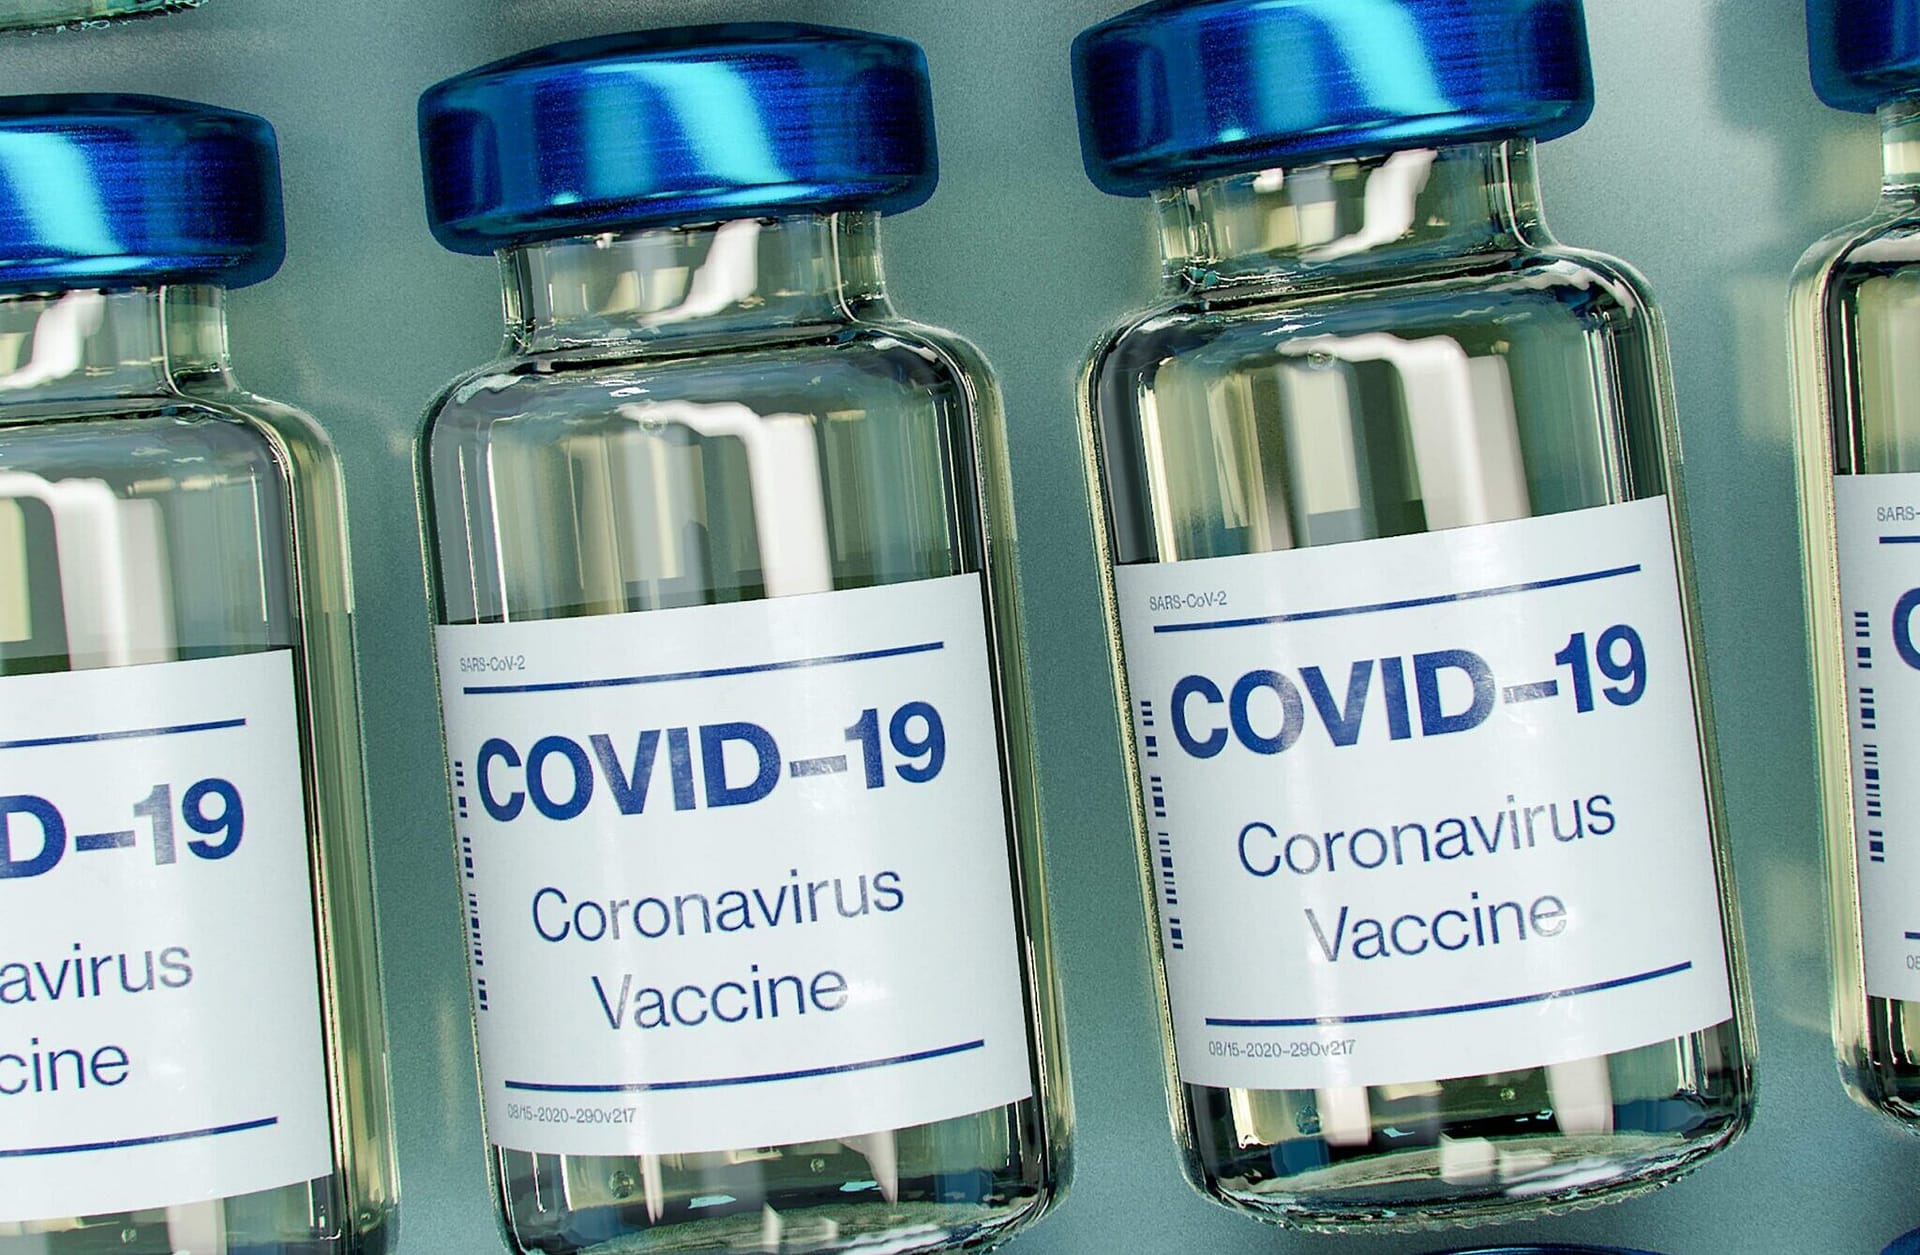 COVID-19 Cases on the Rise